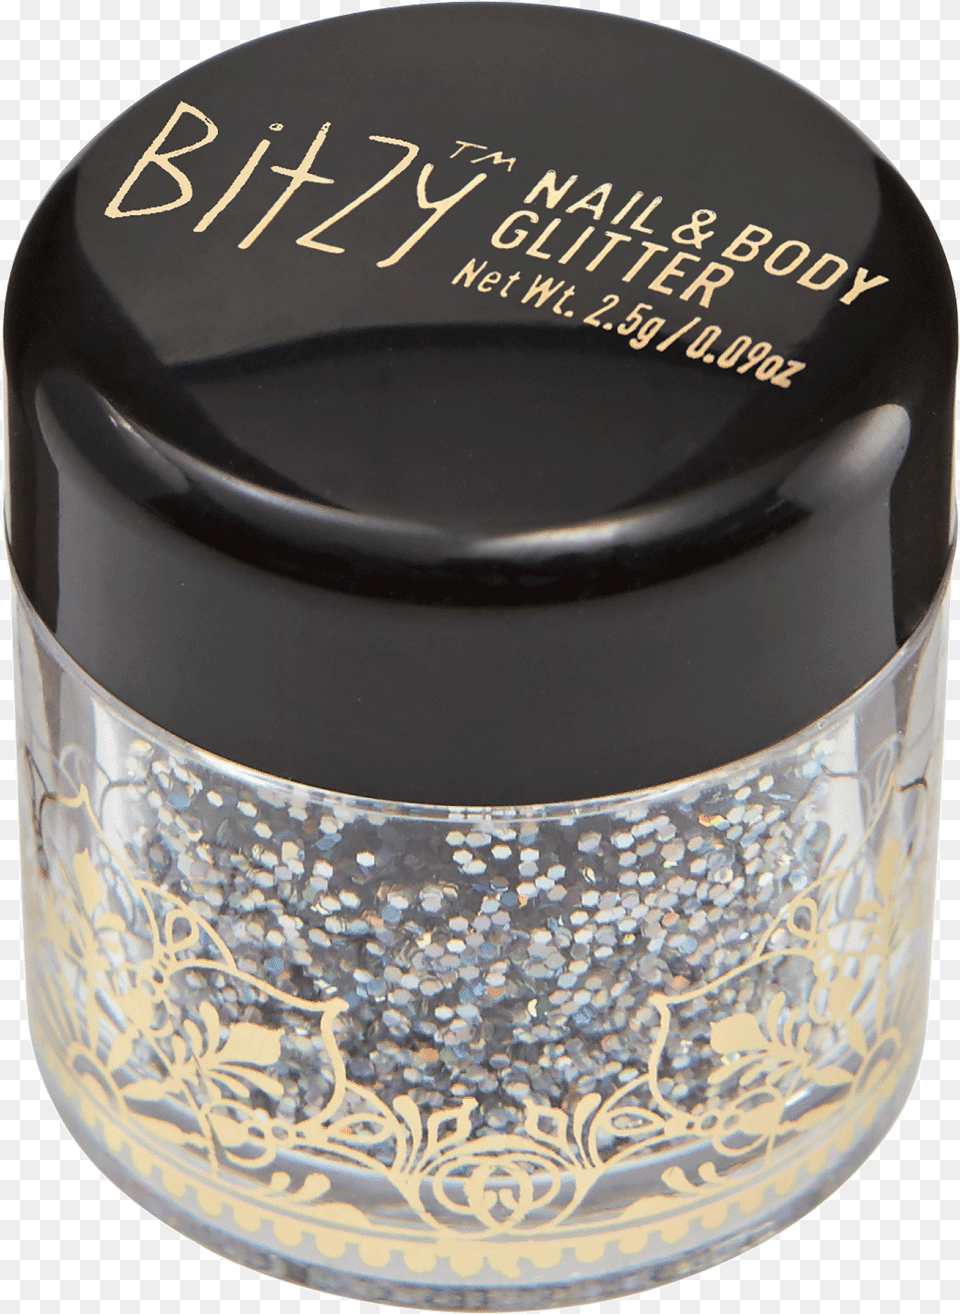 Bitzy Stardust White Nail Amp Body Glitter, Face, Head, Person, Cosmetics Free Transparent Png